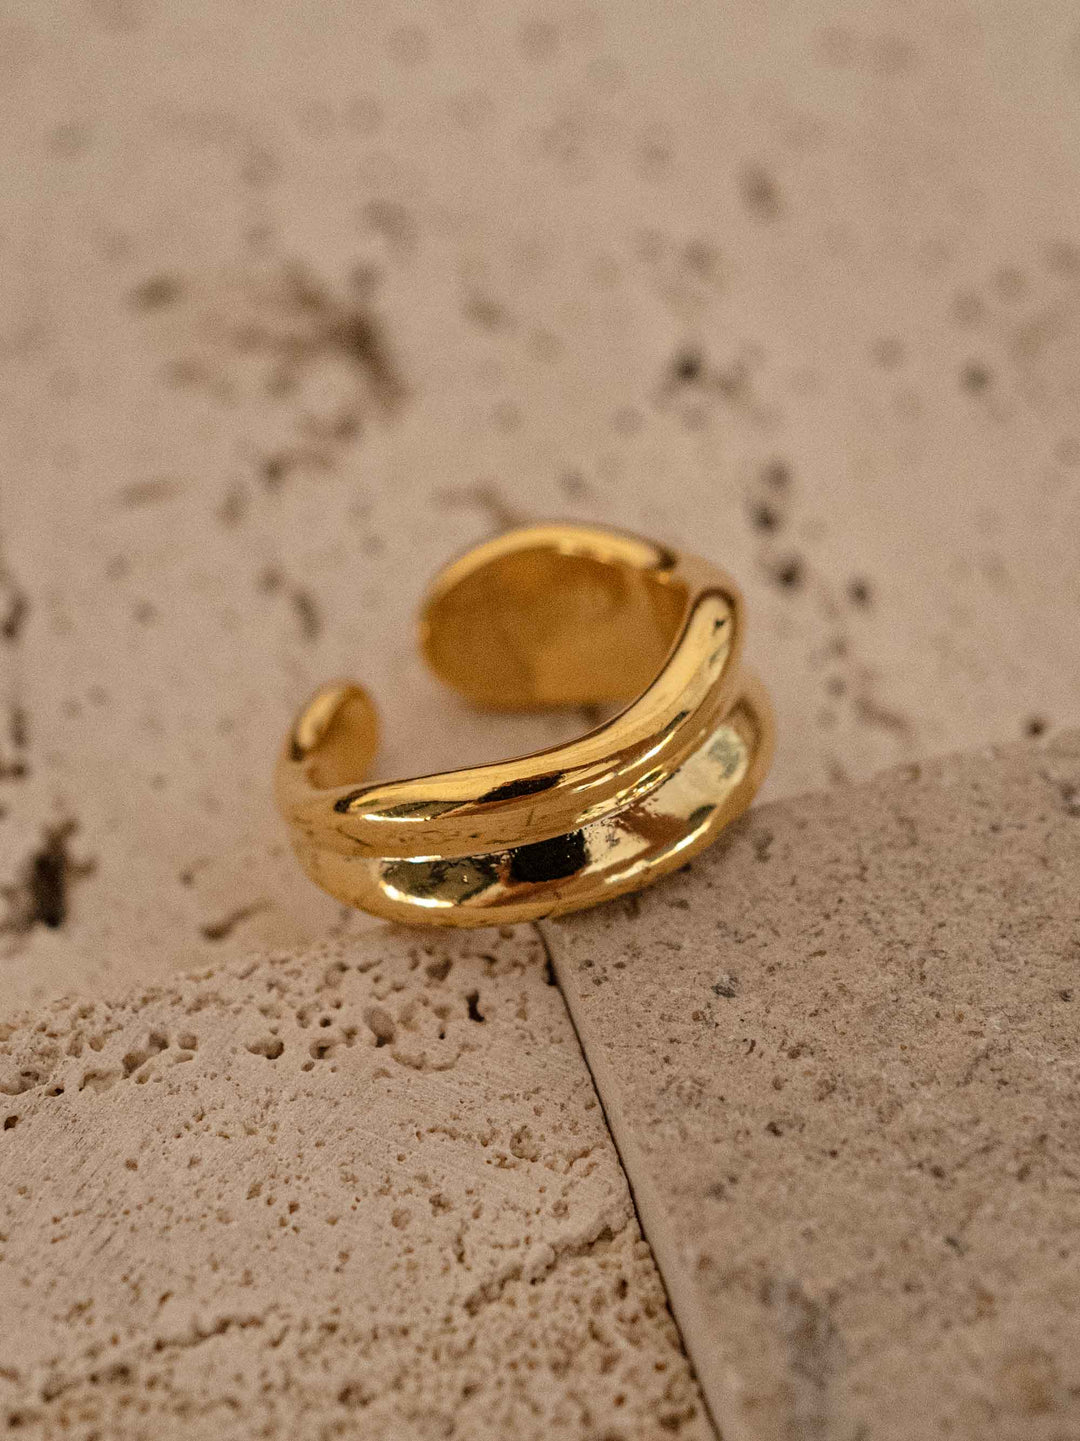 A gold colored irregular ring